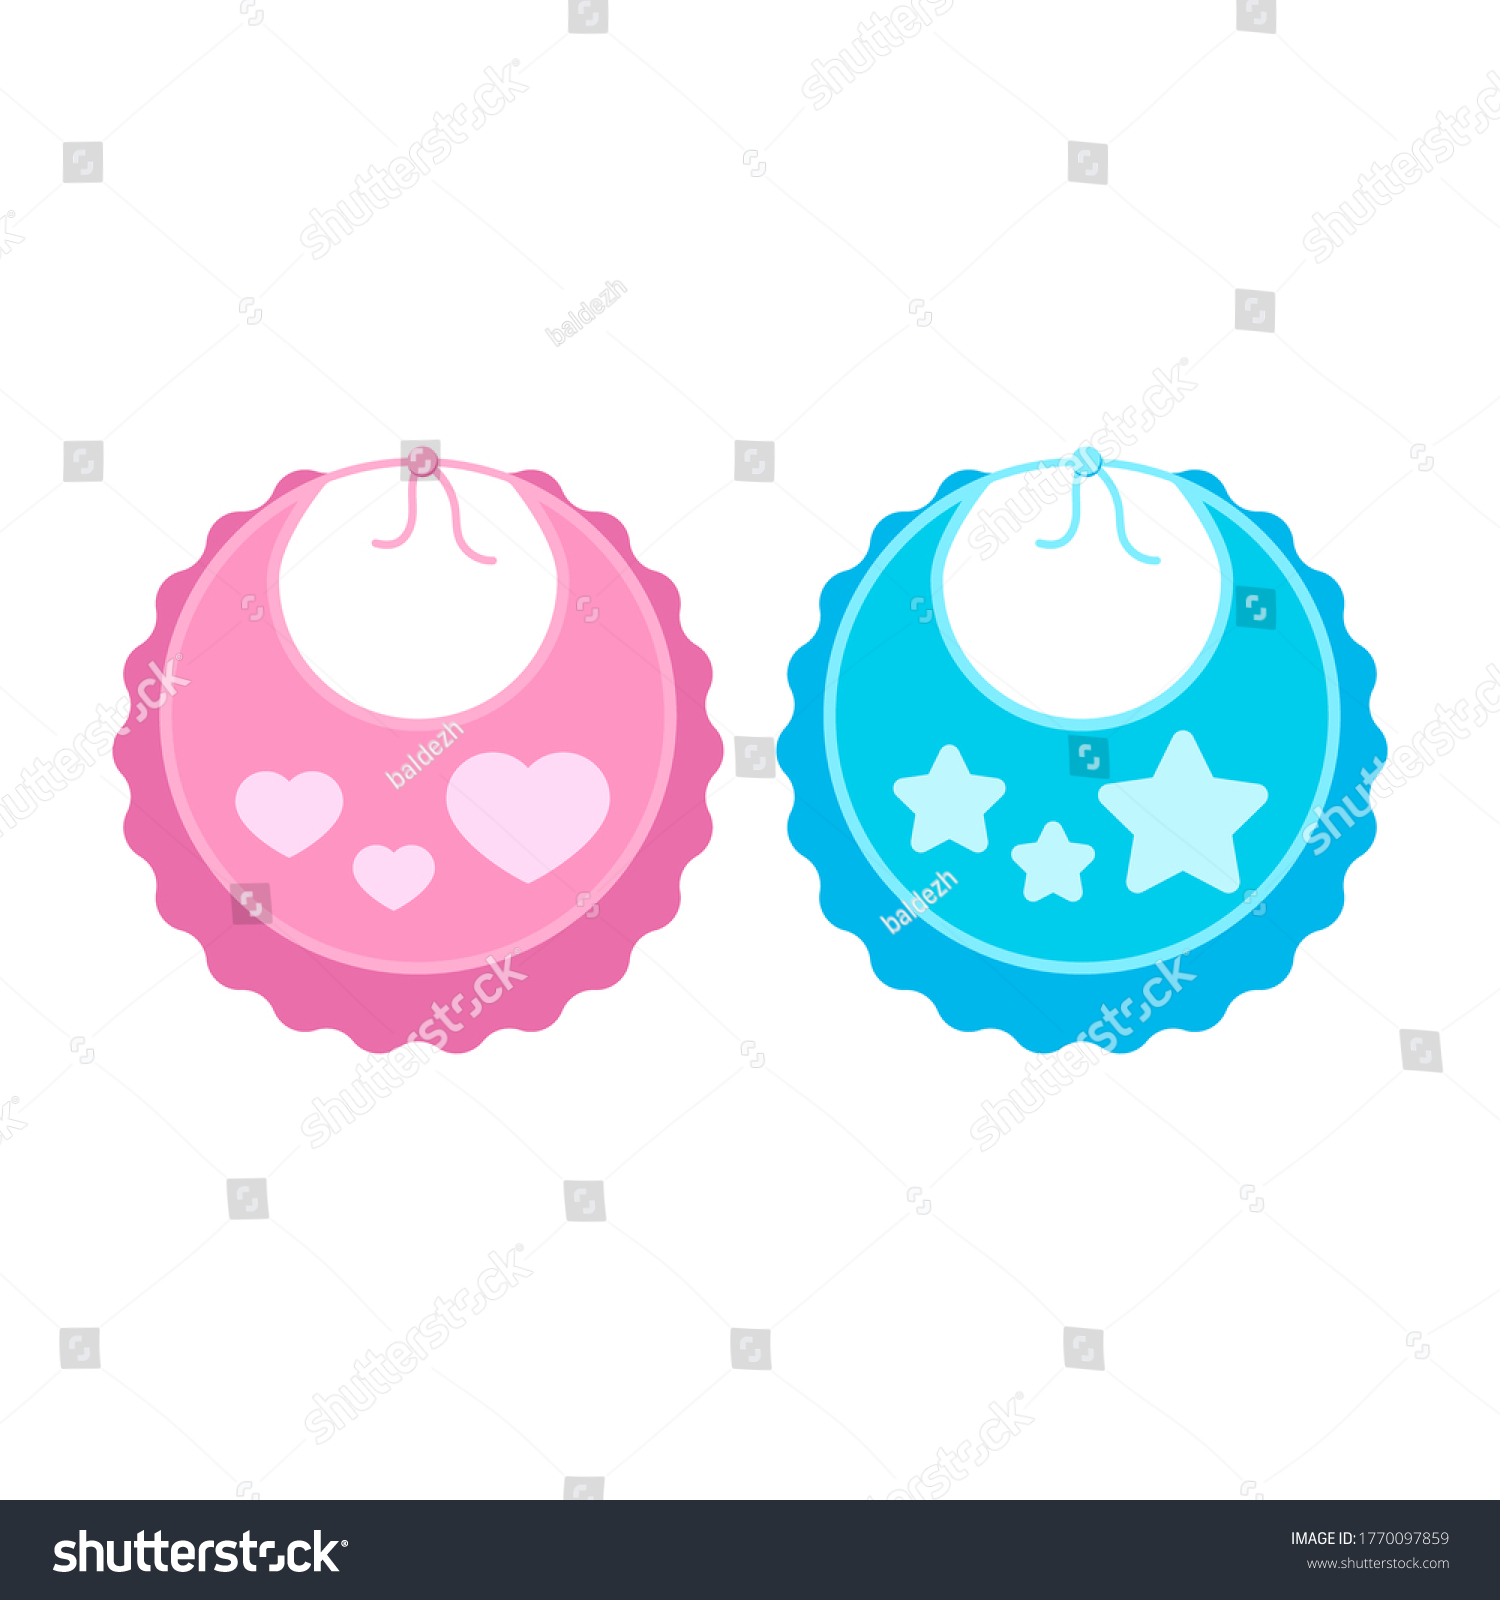 SVG of Baby bib icon logo set isolated on white background. Child clothes for eating - baby bib for boy and girl. Flat design cartoon style vector illustration for web design. svg